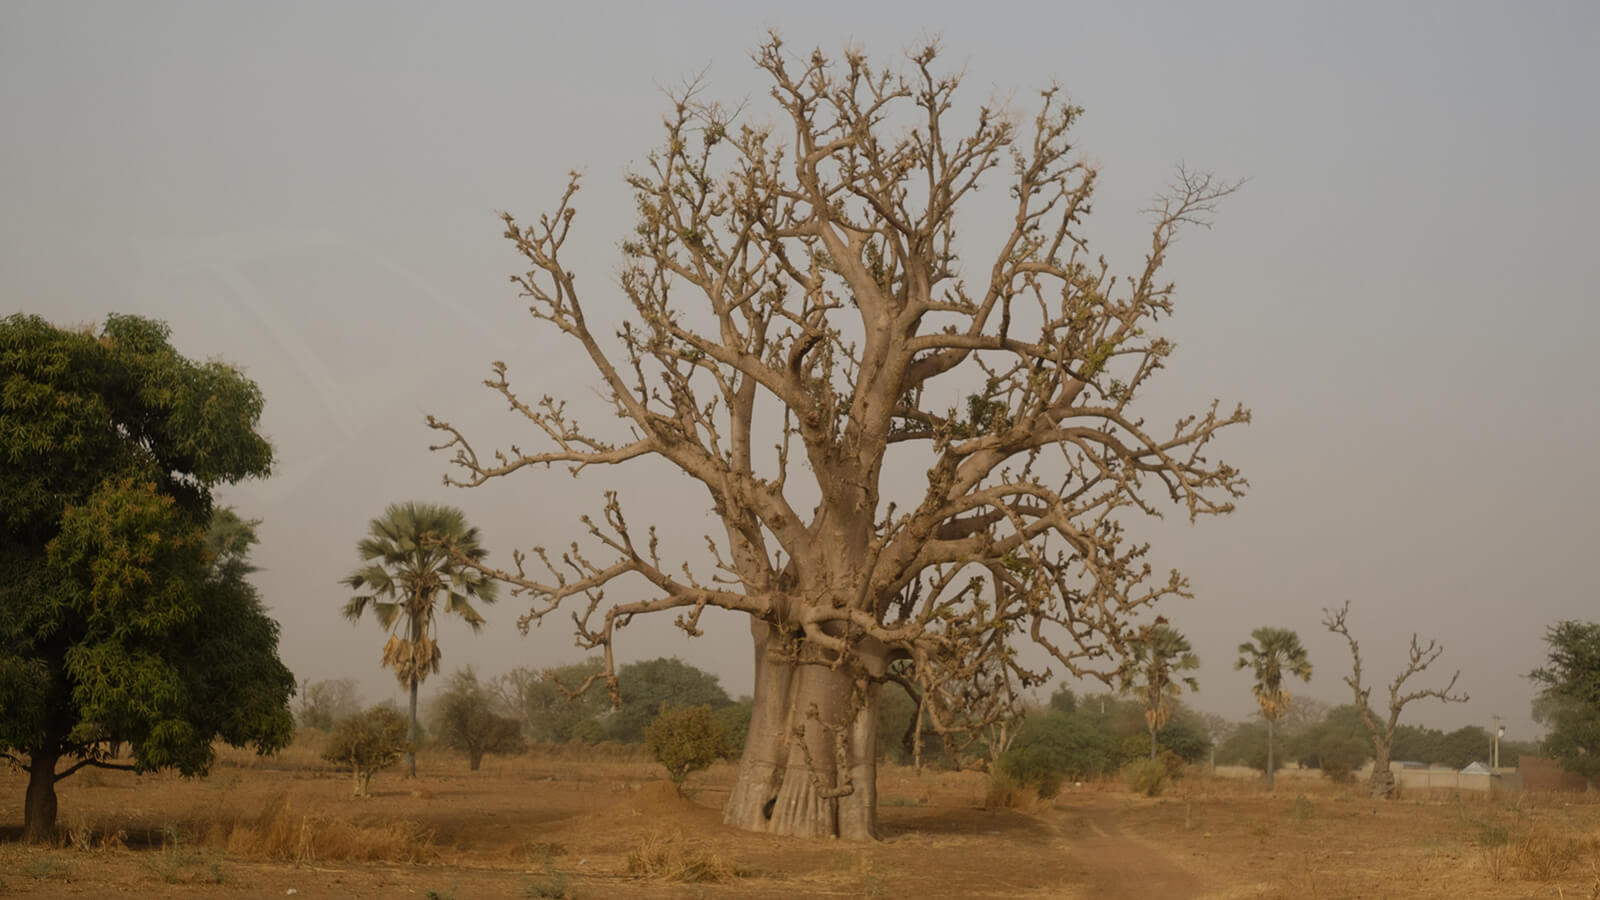 Baobab: What? and Why?